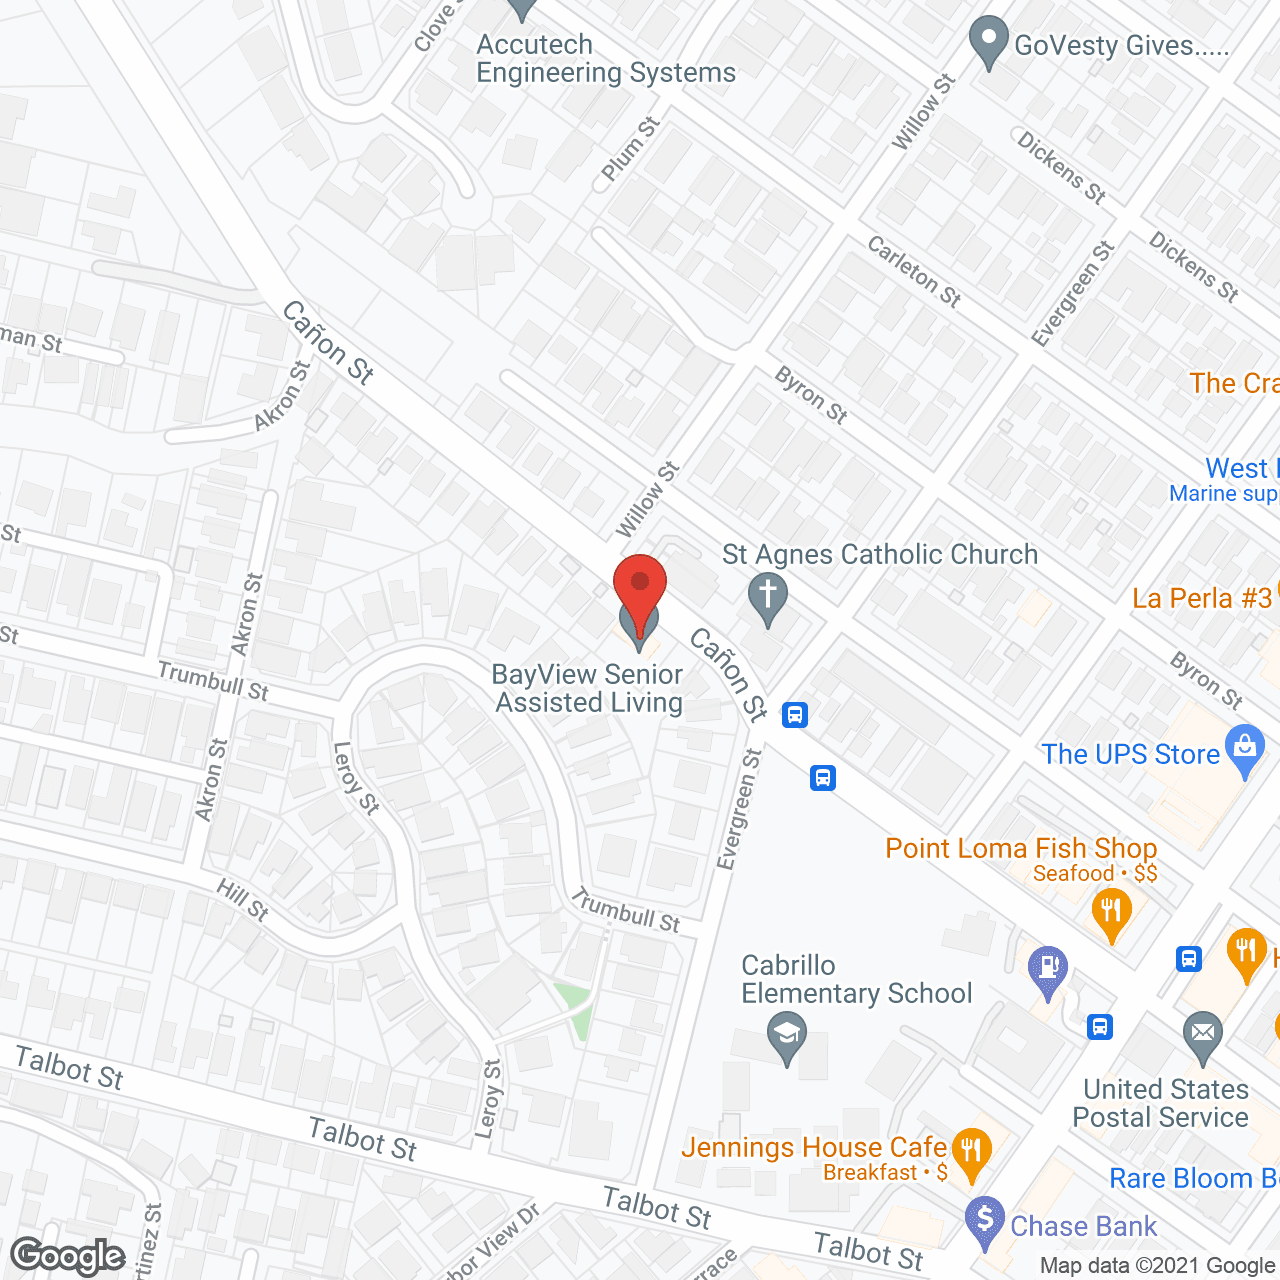 BayView Senior Assisted Living in google map